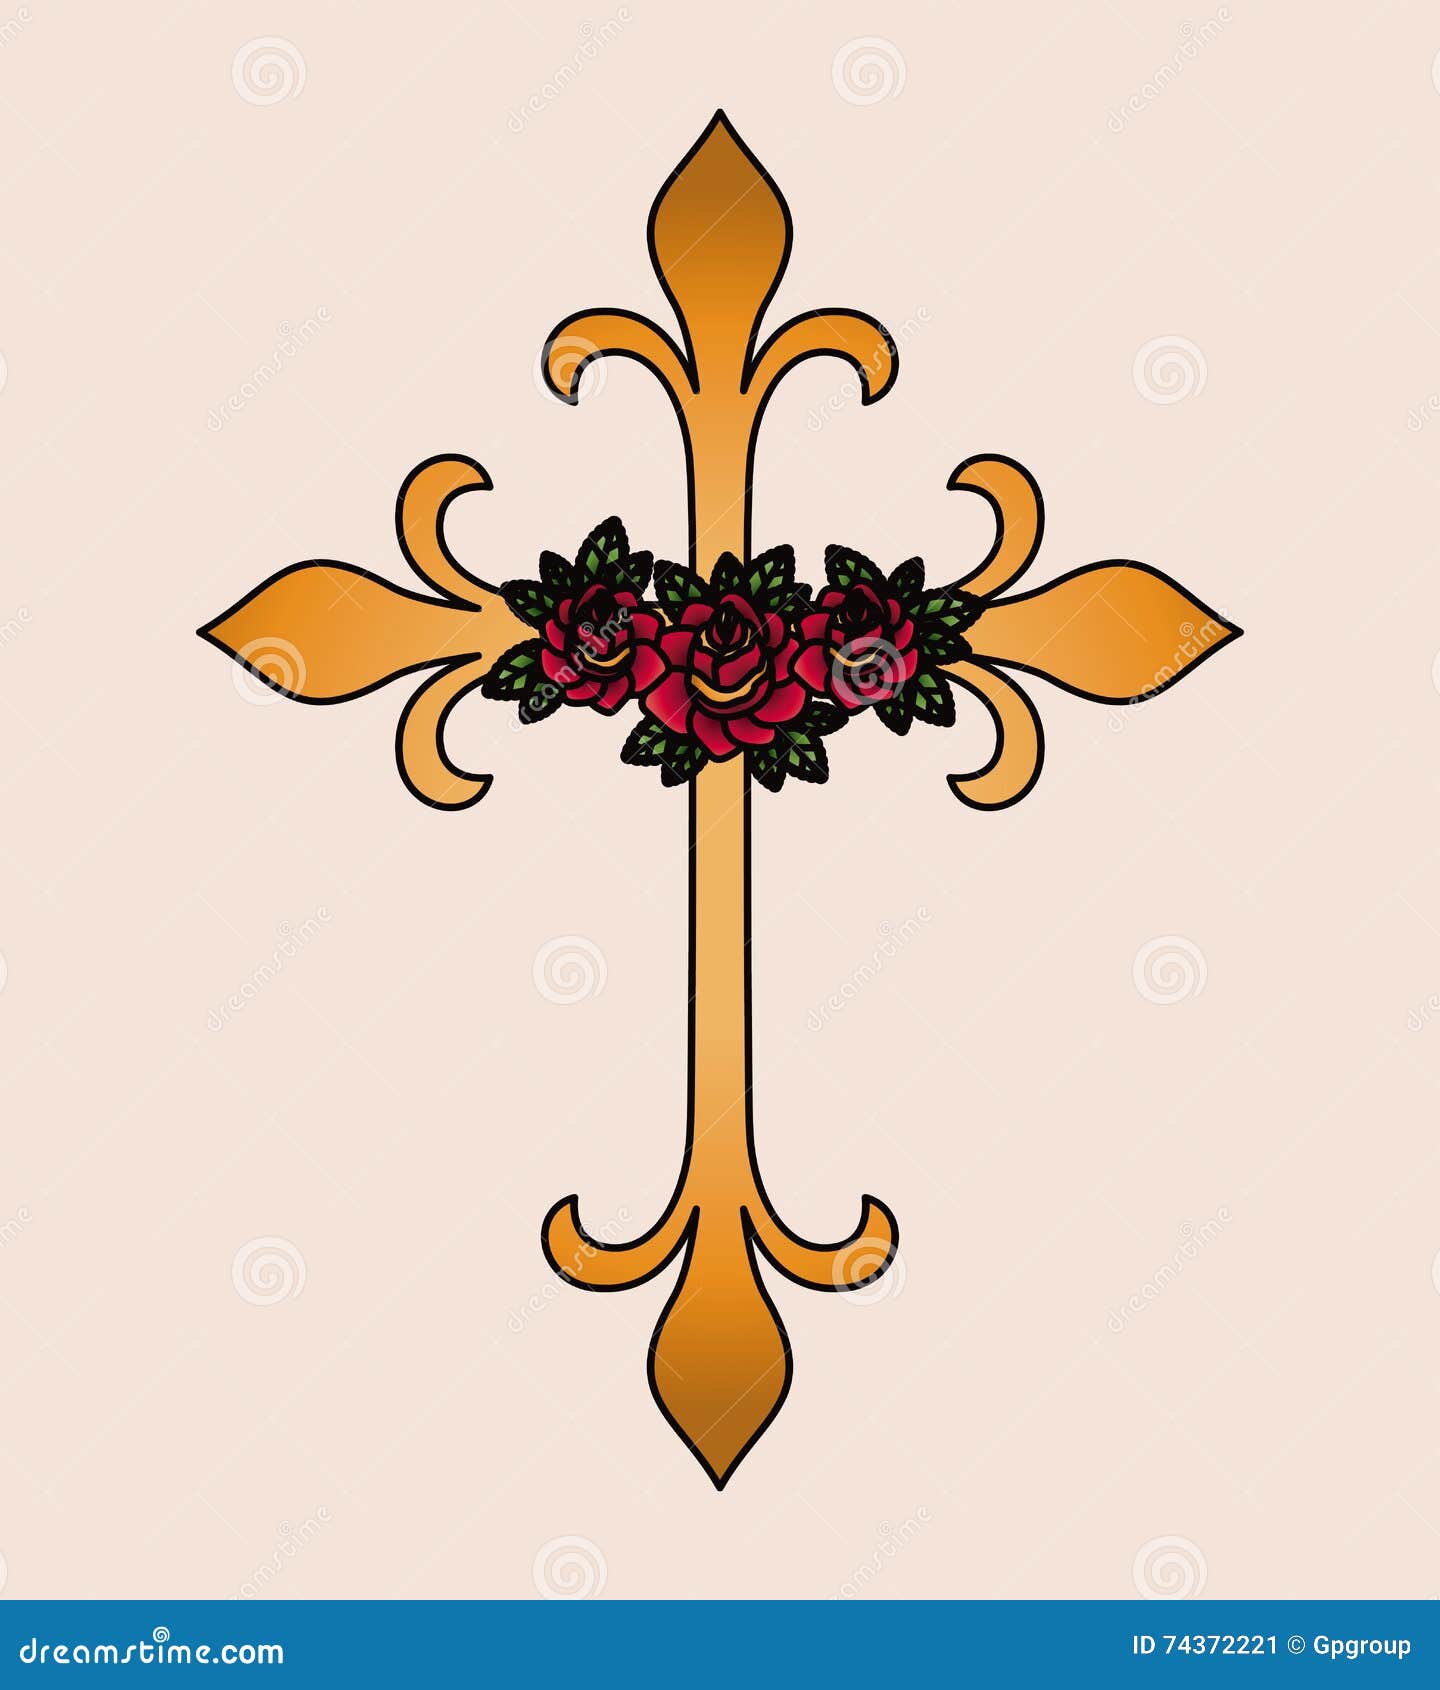 Floral Cross Tattoo on the Forearm